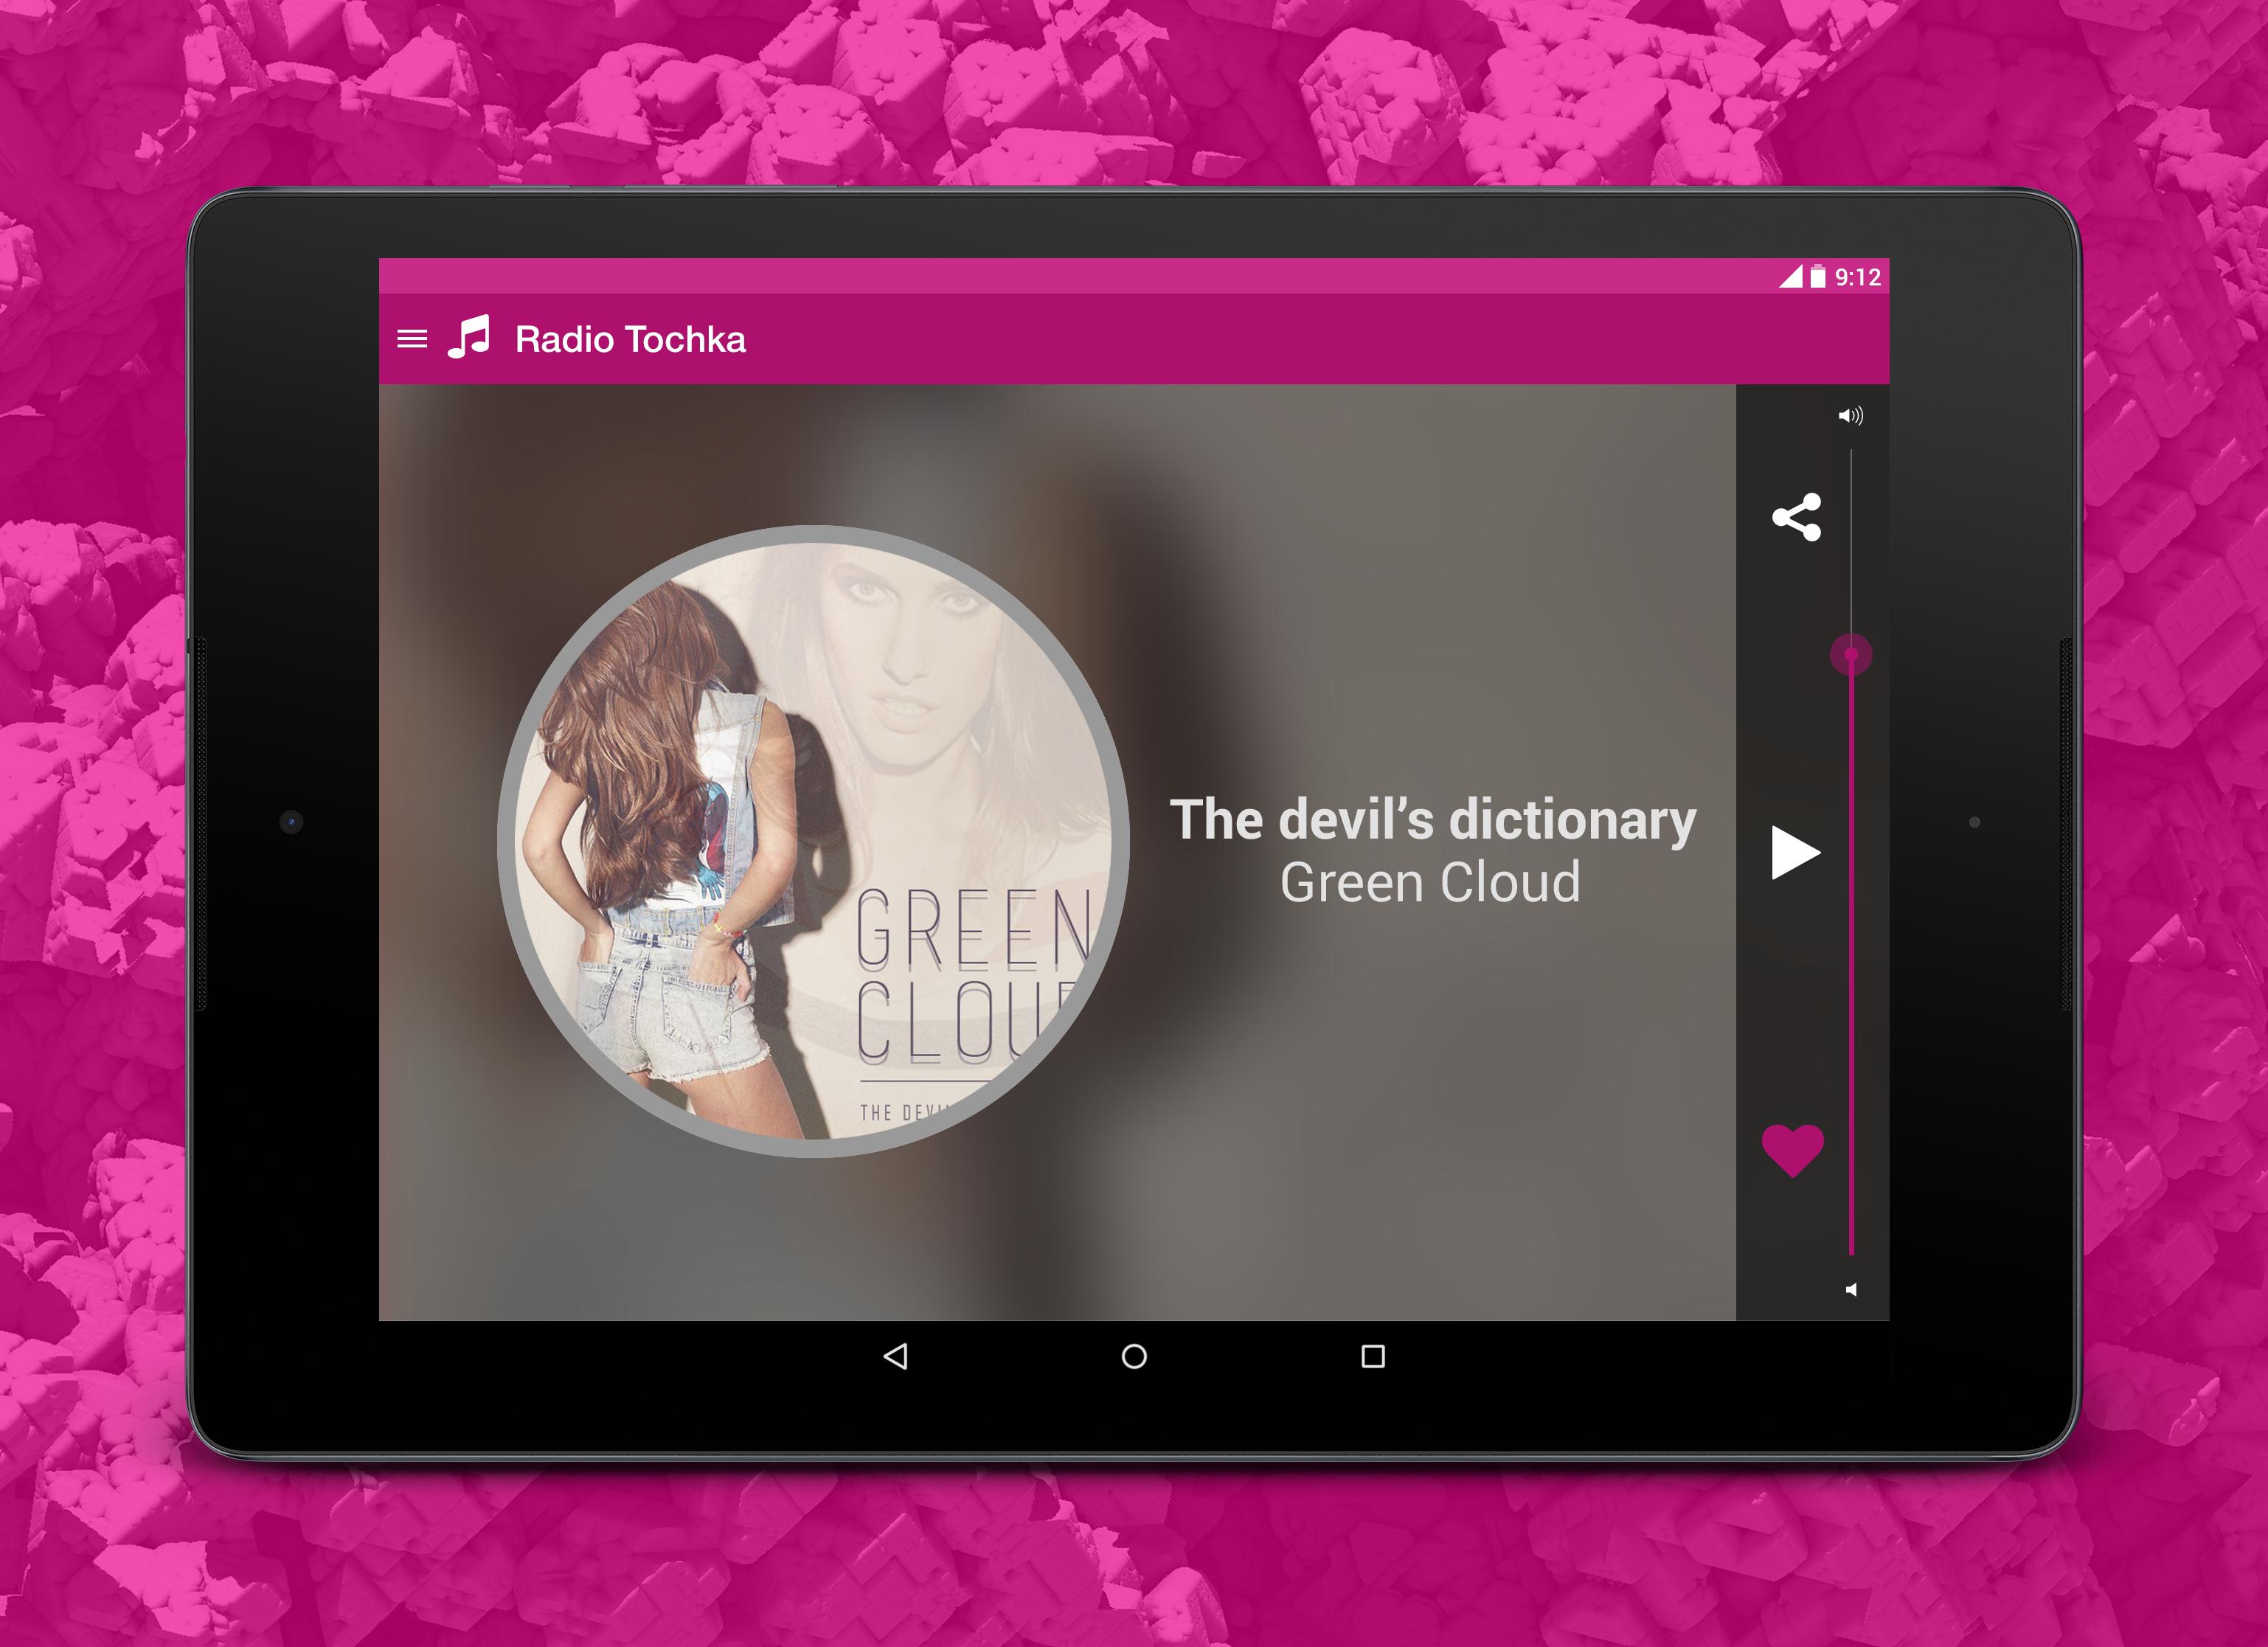 Radio Tochka for Android - APK Download